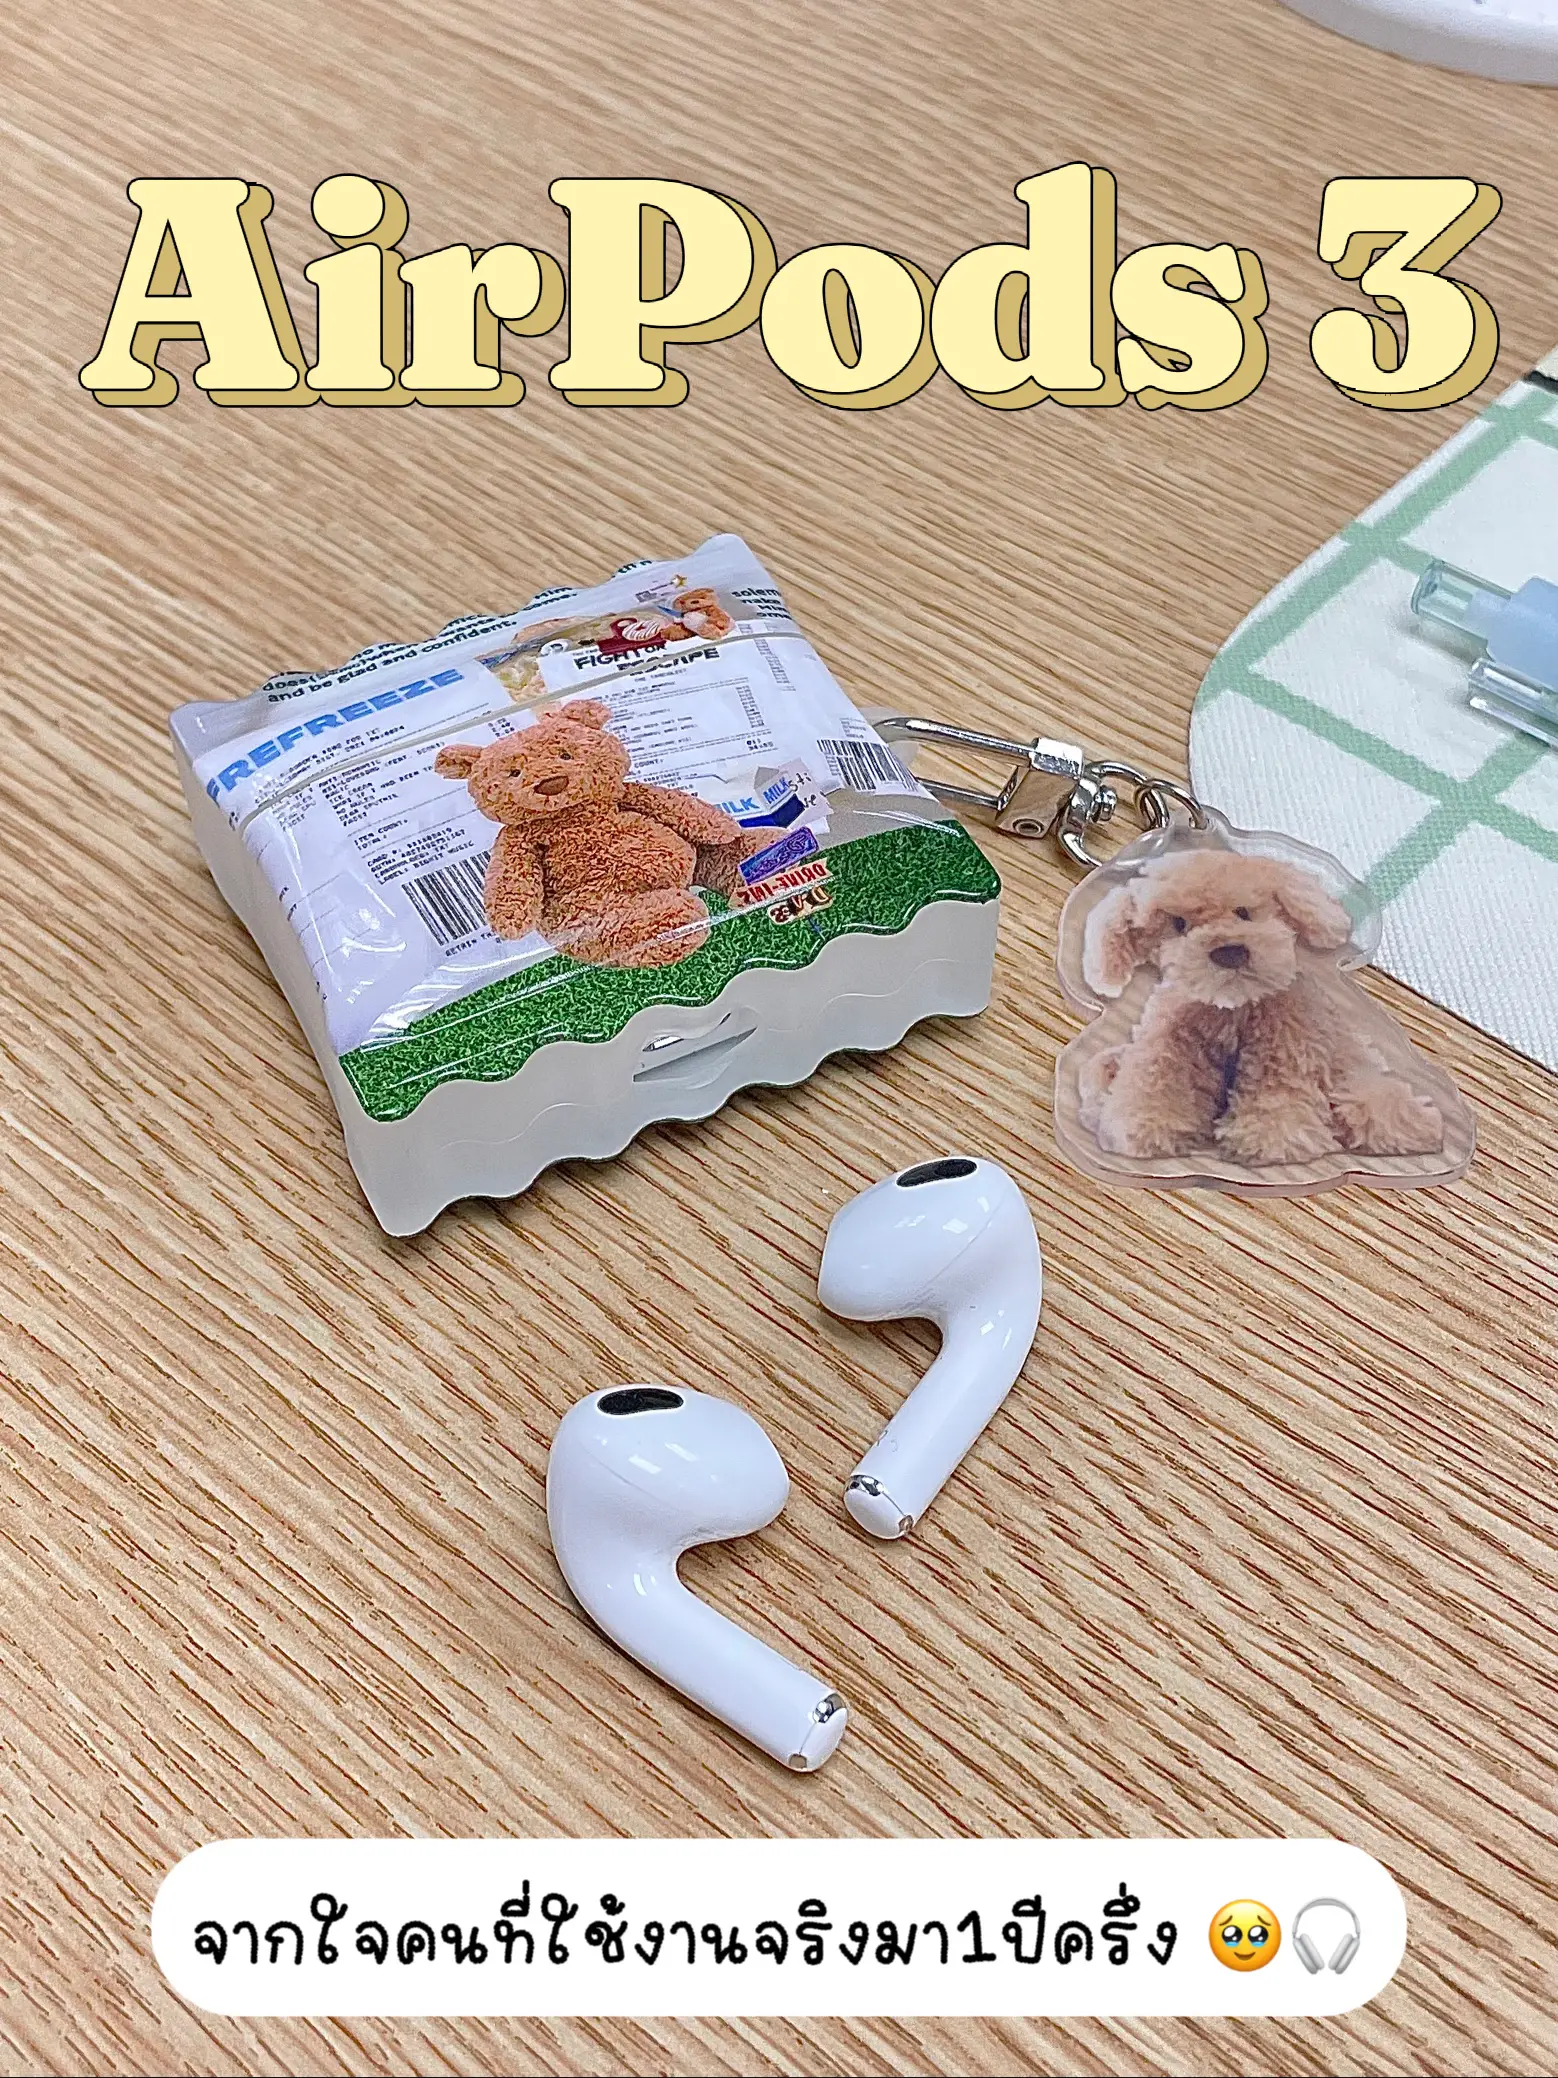 NEW Apple AirPods 2 (2nd Generation) Unboxing & Review + GIVEAWAY